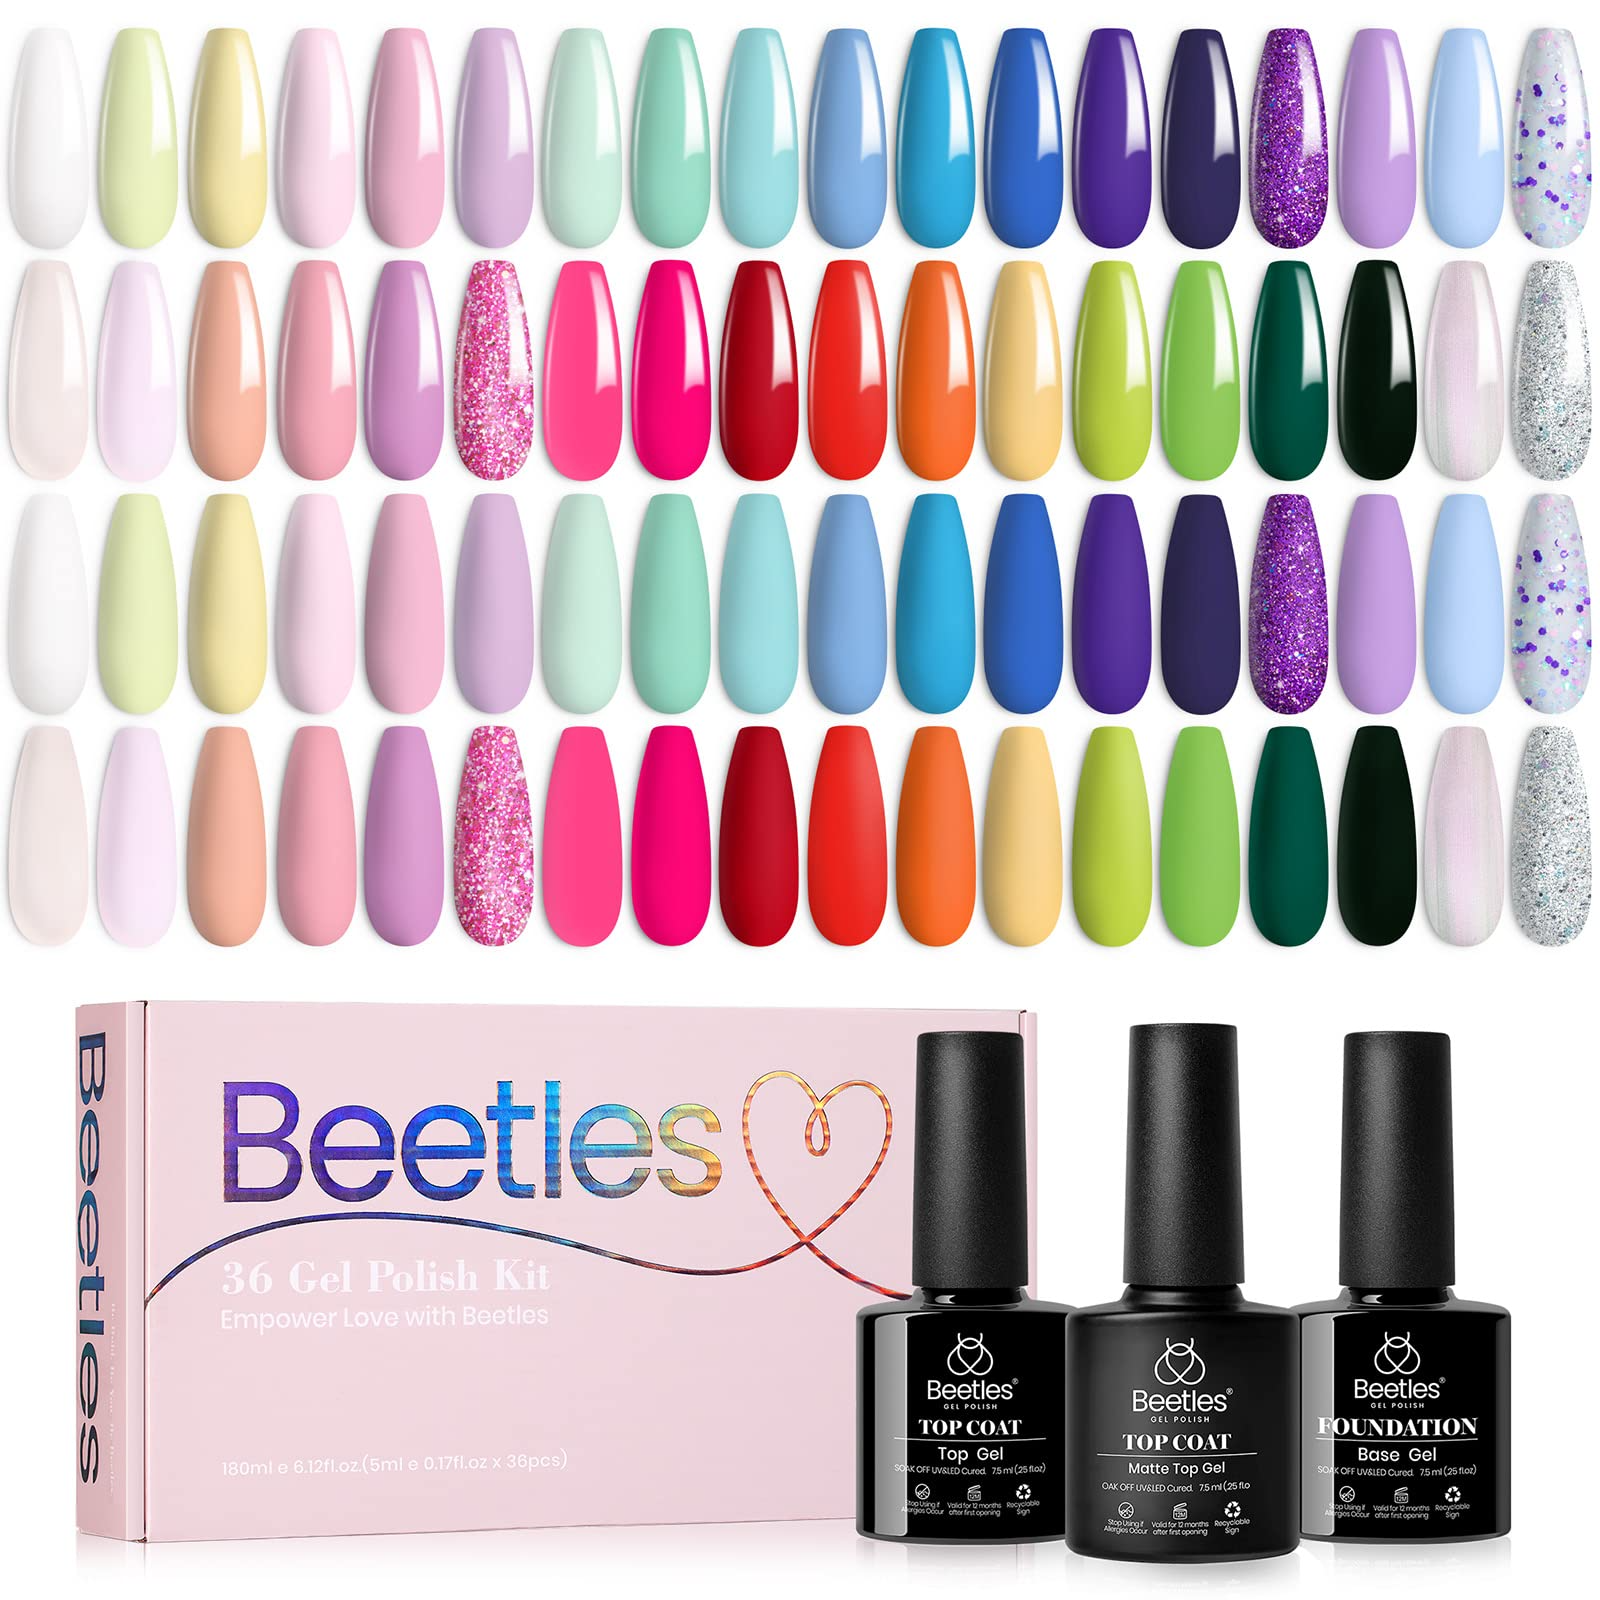 Beetles Gel Nail Polish Kit 36 Colors with Base Gel Glossy & Matte Top Coat, 2023 Popular Spring Pastel Girly Colors Gel Polish Set All Seasons Solid Sparkle Glitters Colors Valentine Gift for Women